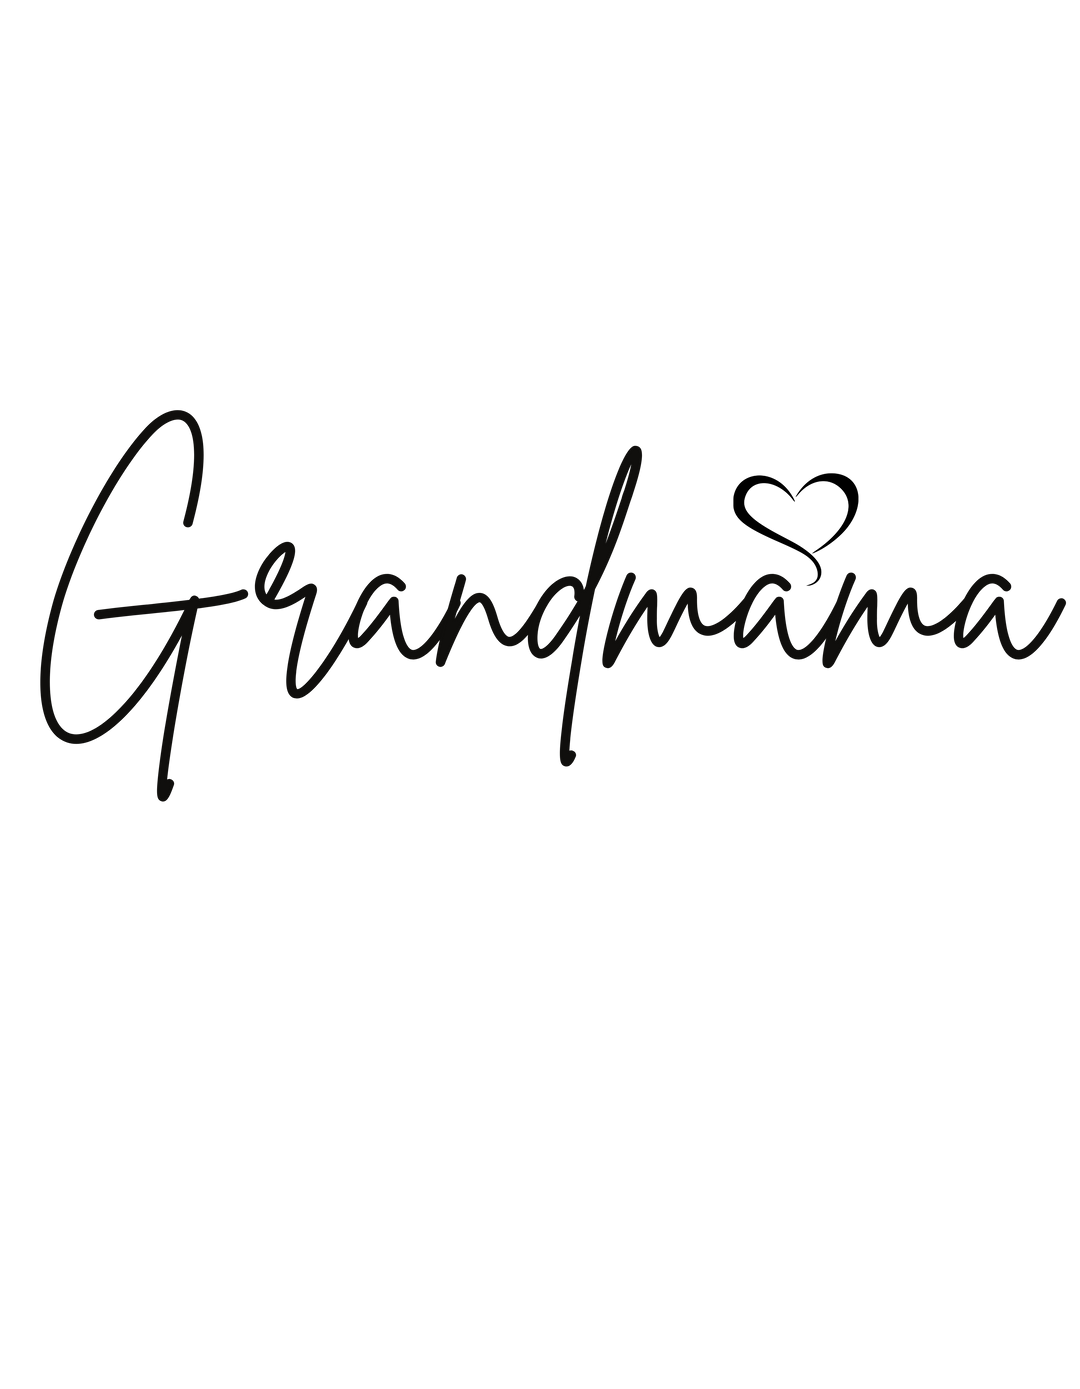 Grandmama Hoodie: Unisex heavy blend sweatshirt in black with calligraphy text. Cotton-polyester fabric, kangaroo pocket, drawstring hood. Classic fit, tear-away label, sizes S-5XL. From Worlds Worst Tees.